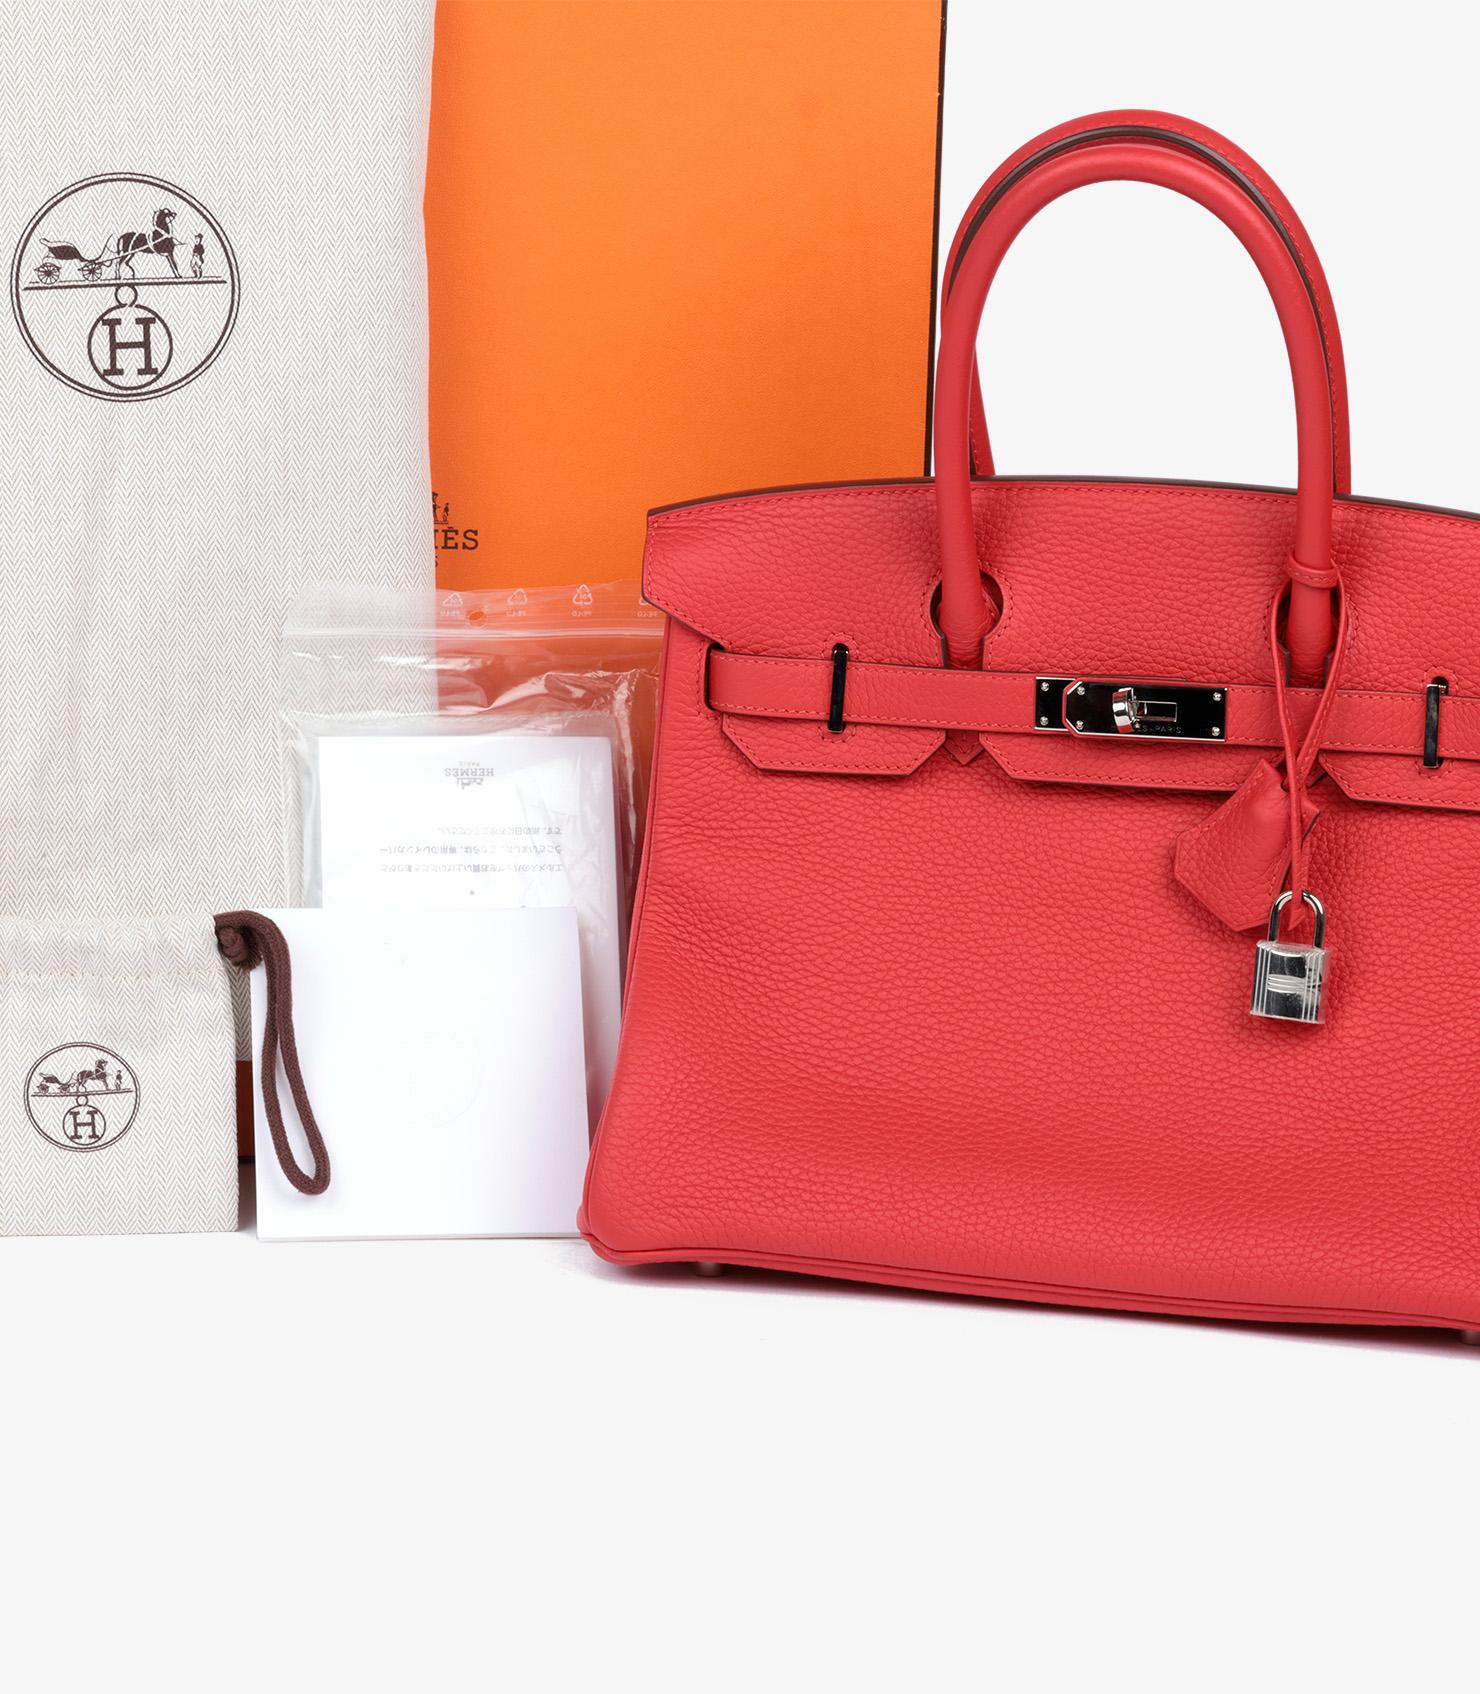 Hermès Rouge Tomate Clemence Leather Birkin 30cm For Sale 7